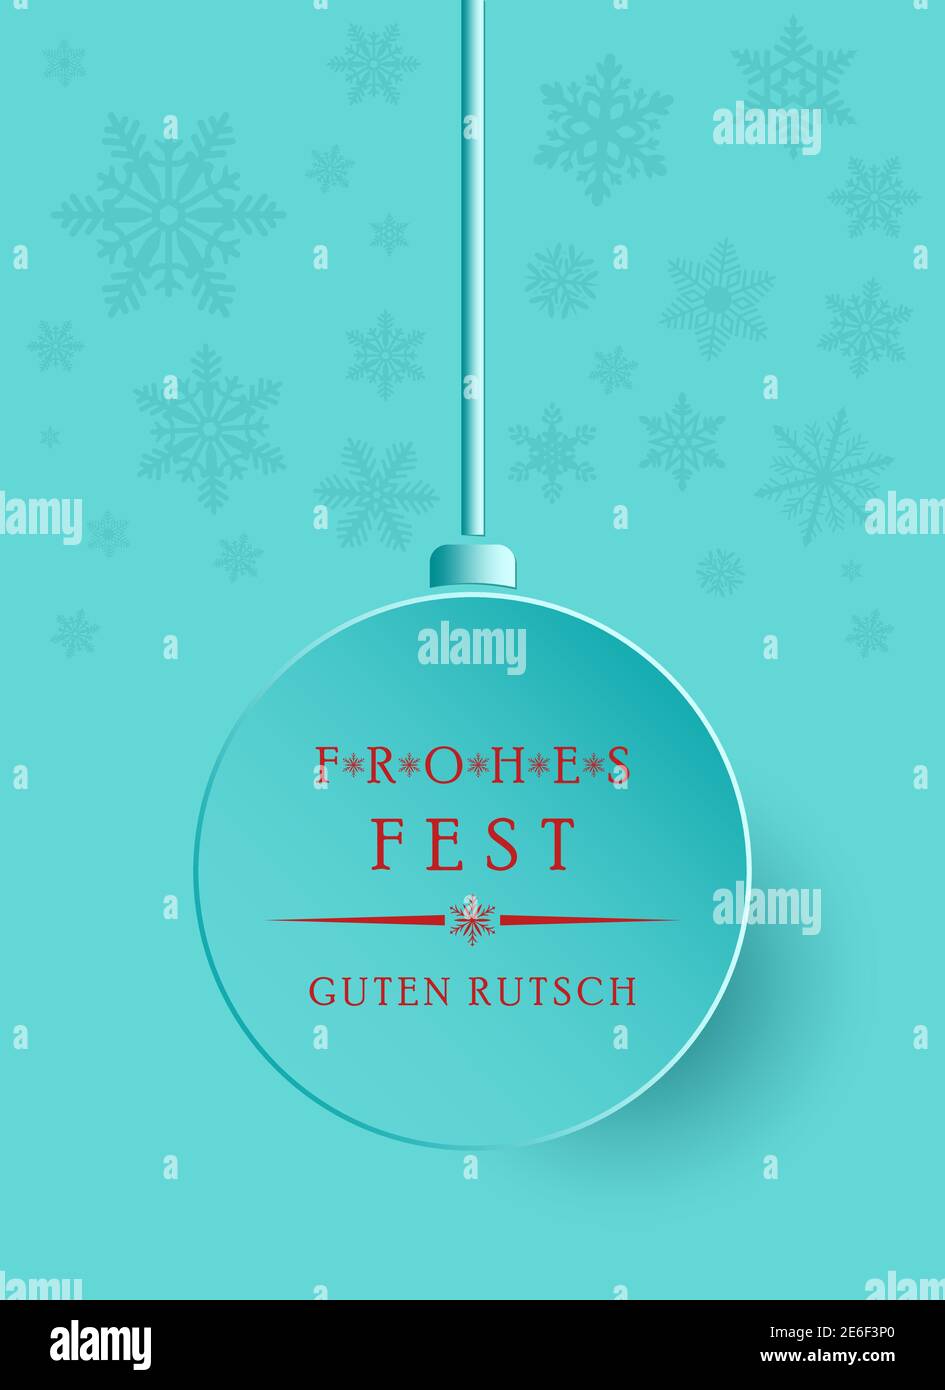 Frohes Fest Christmas bauble vector. Snowflakes, hanger and German Christmas greetings.Frohes Fest is Merry Christmas, Guten Rutsch is Happy New Year. Stock Vector